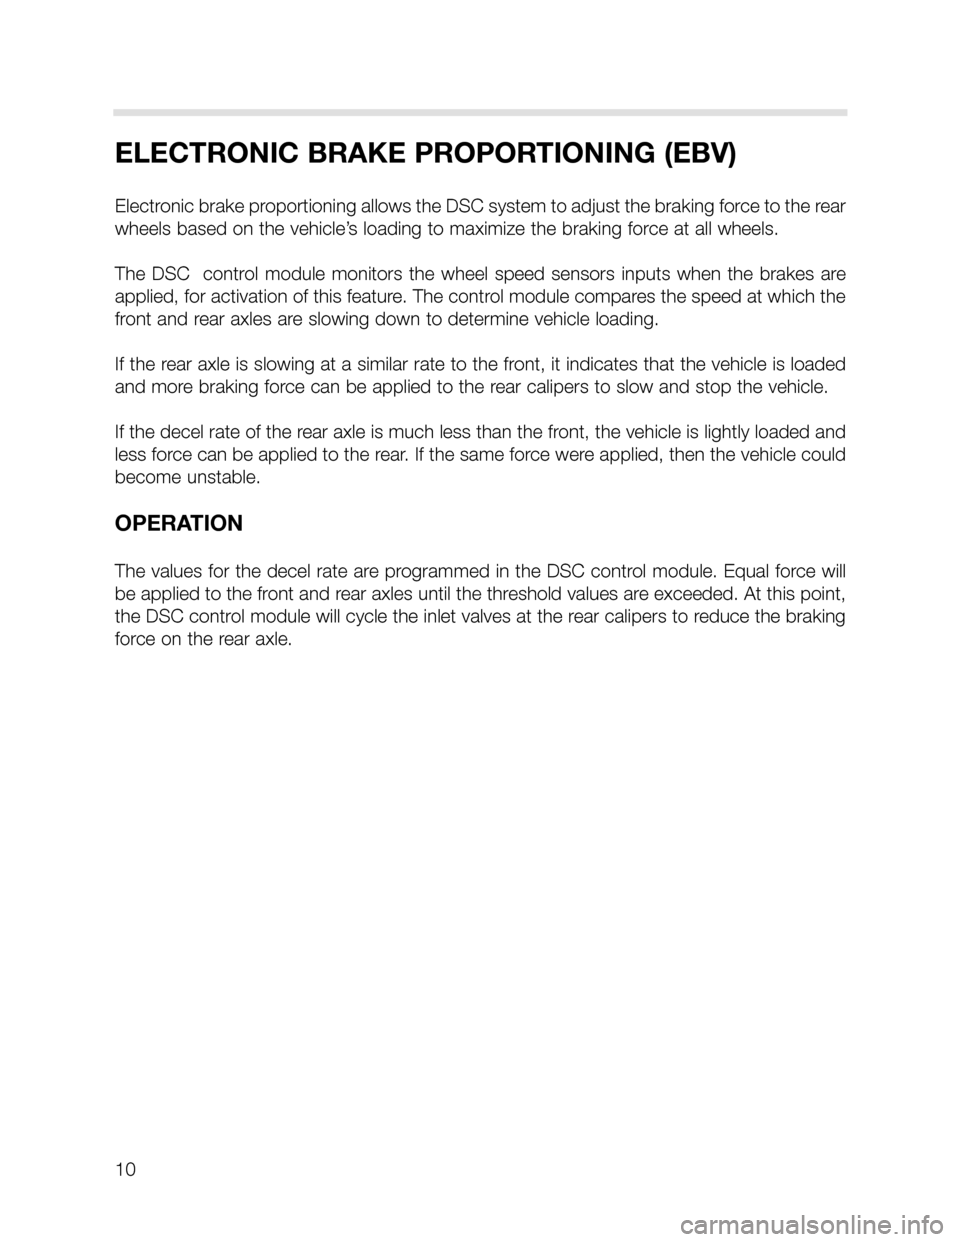 BMW X5 1999 E53 DSC System Workshop Manual 10
ELECTRONIC BRAKE PROPORTIONING (EBV)
Electronic brake proportioning allows the DSC system to adjust the braking force to the rear
wheels based on the vehicle’s loading to maximize the braking for